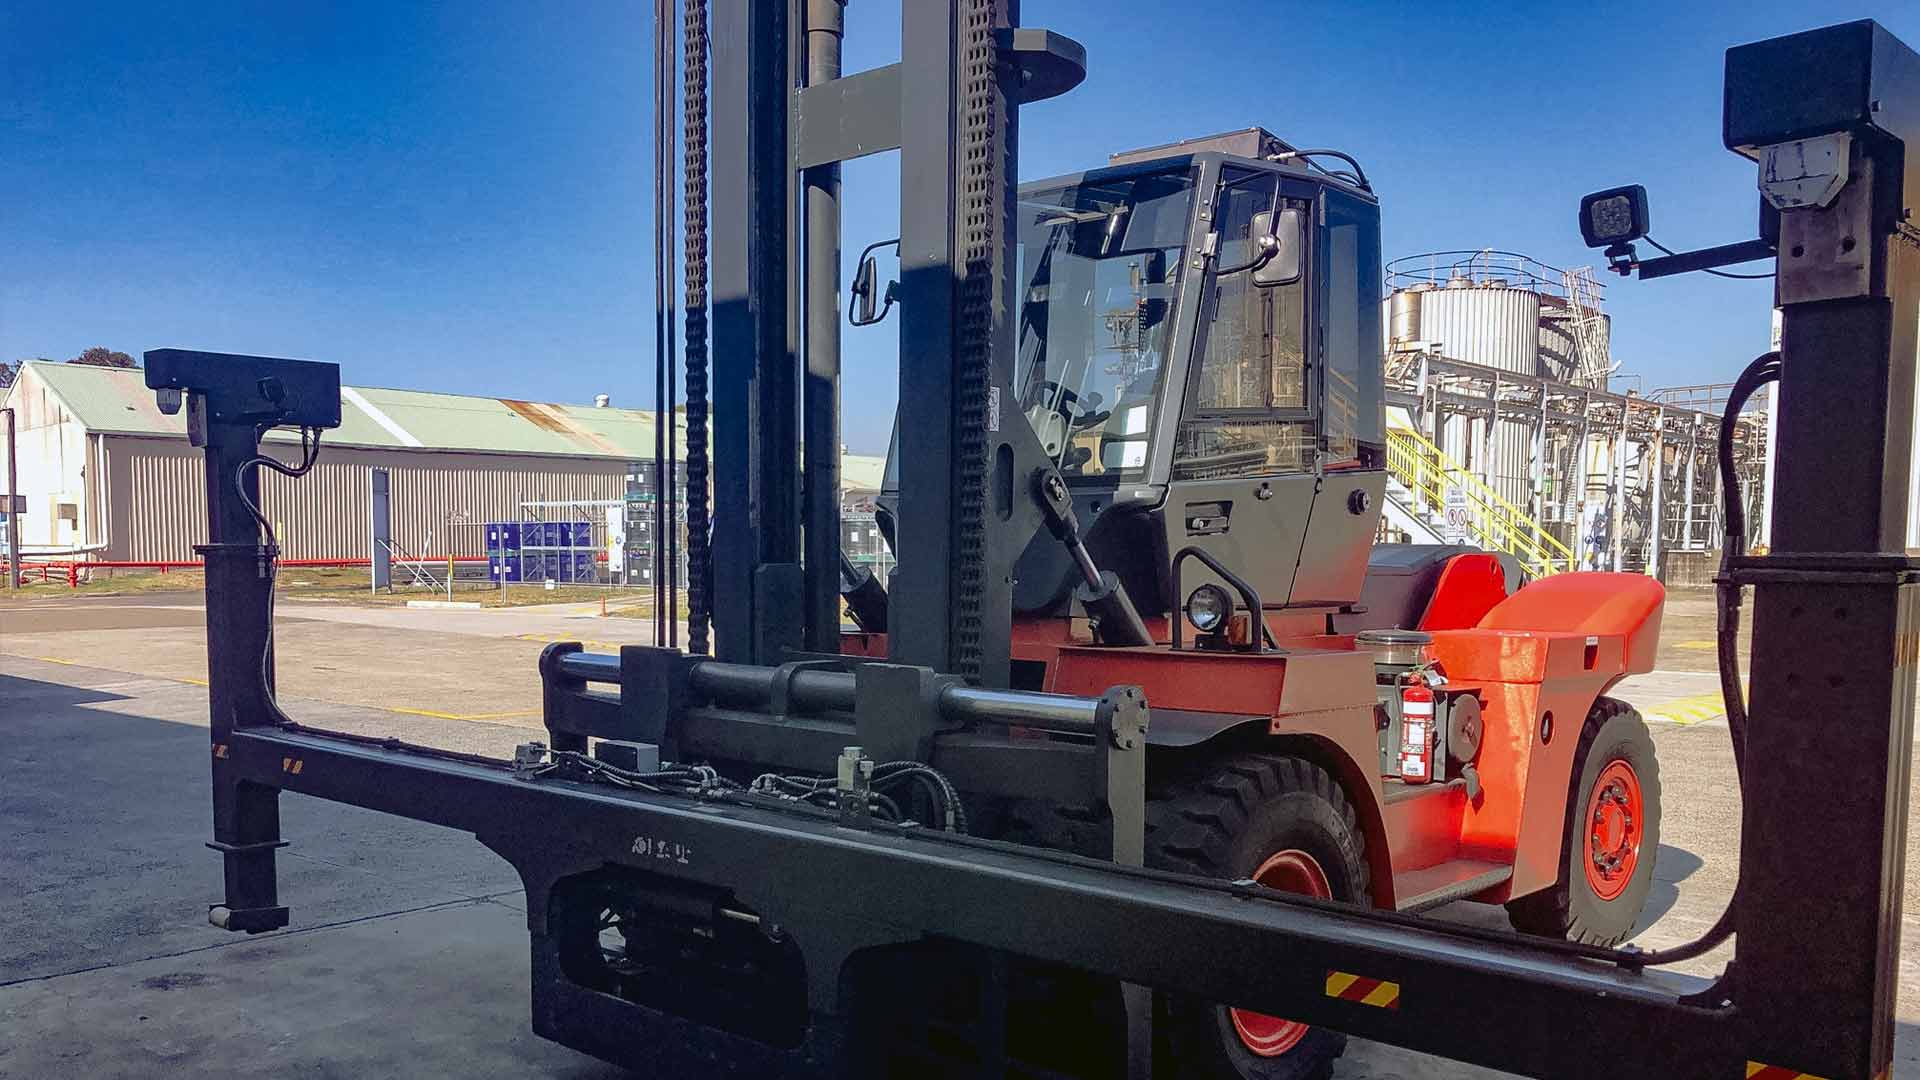 Red forklift truck with wide attachment in front of silos and an industrial plant in the background